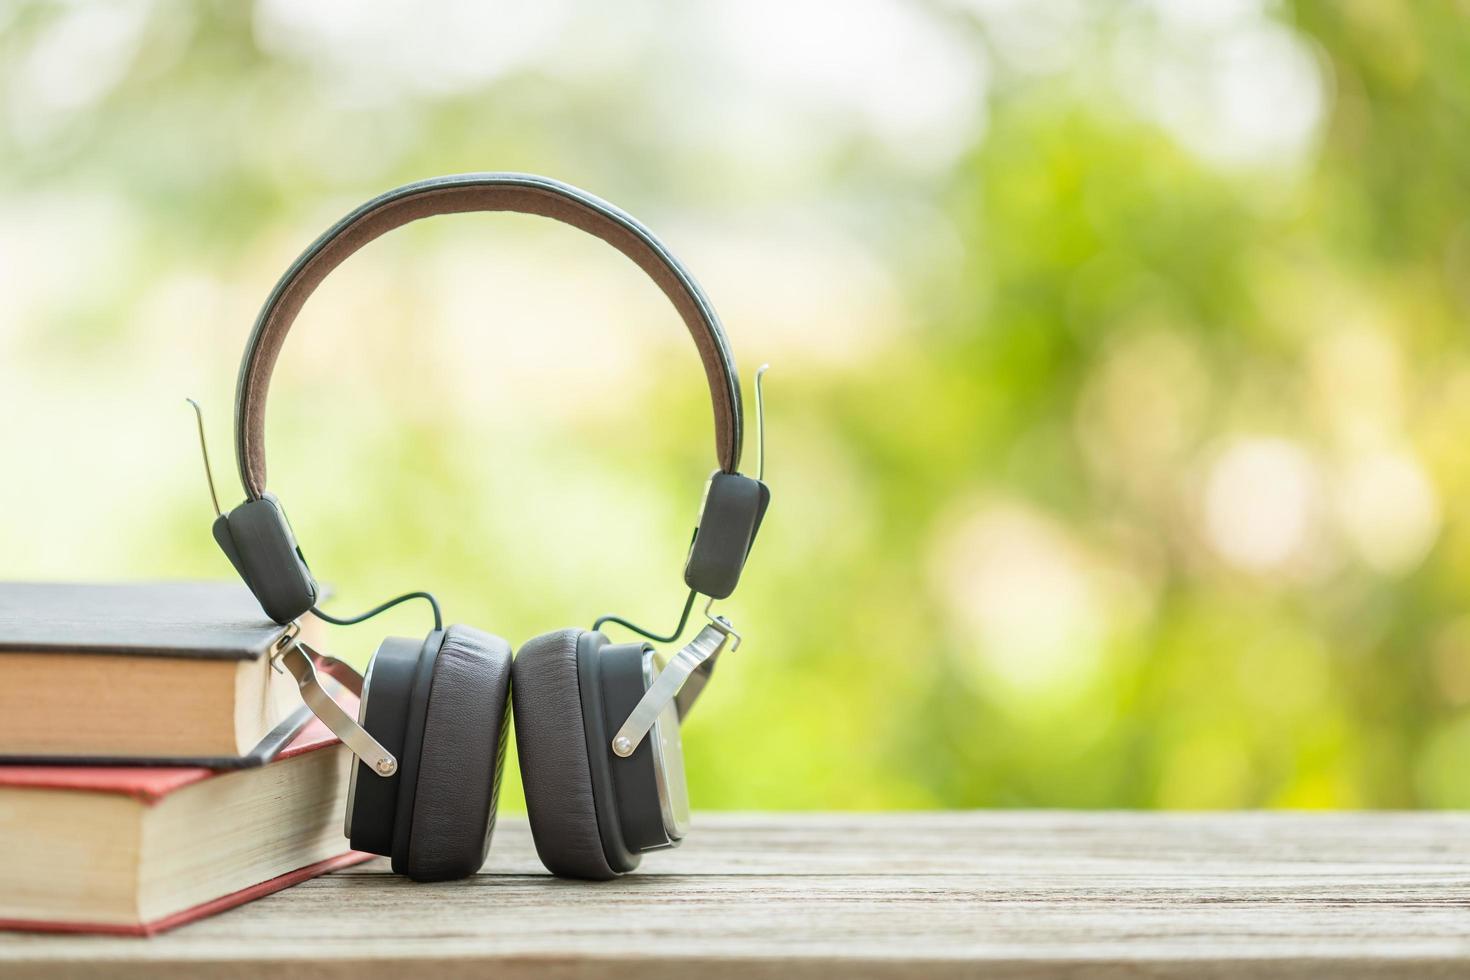 Book and black headphone on wooden table with abstract green nature blur background. Reading and education concept photo